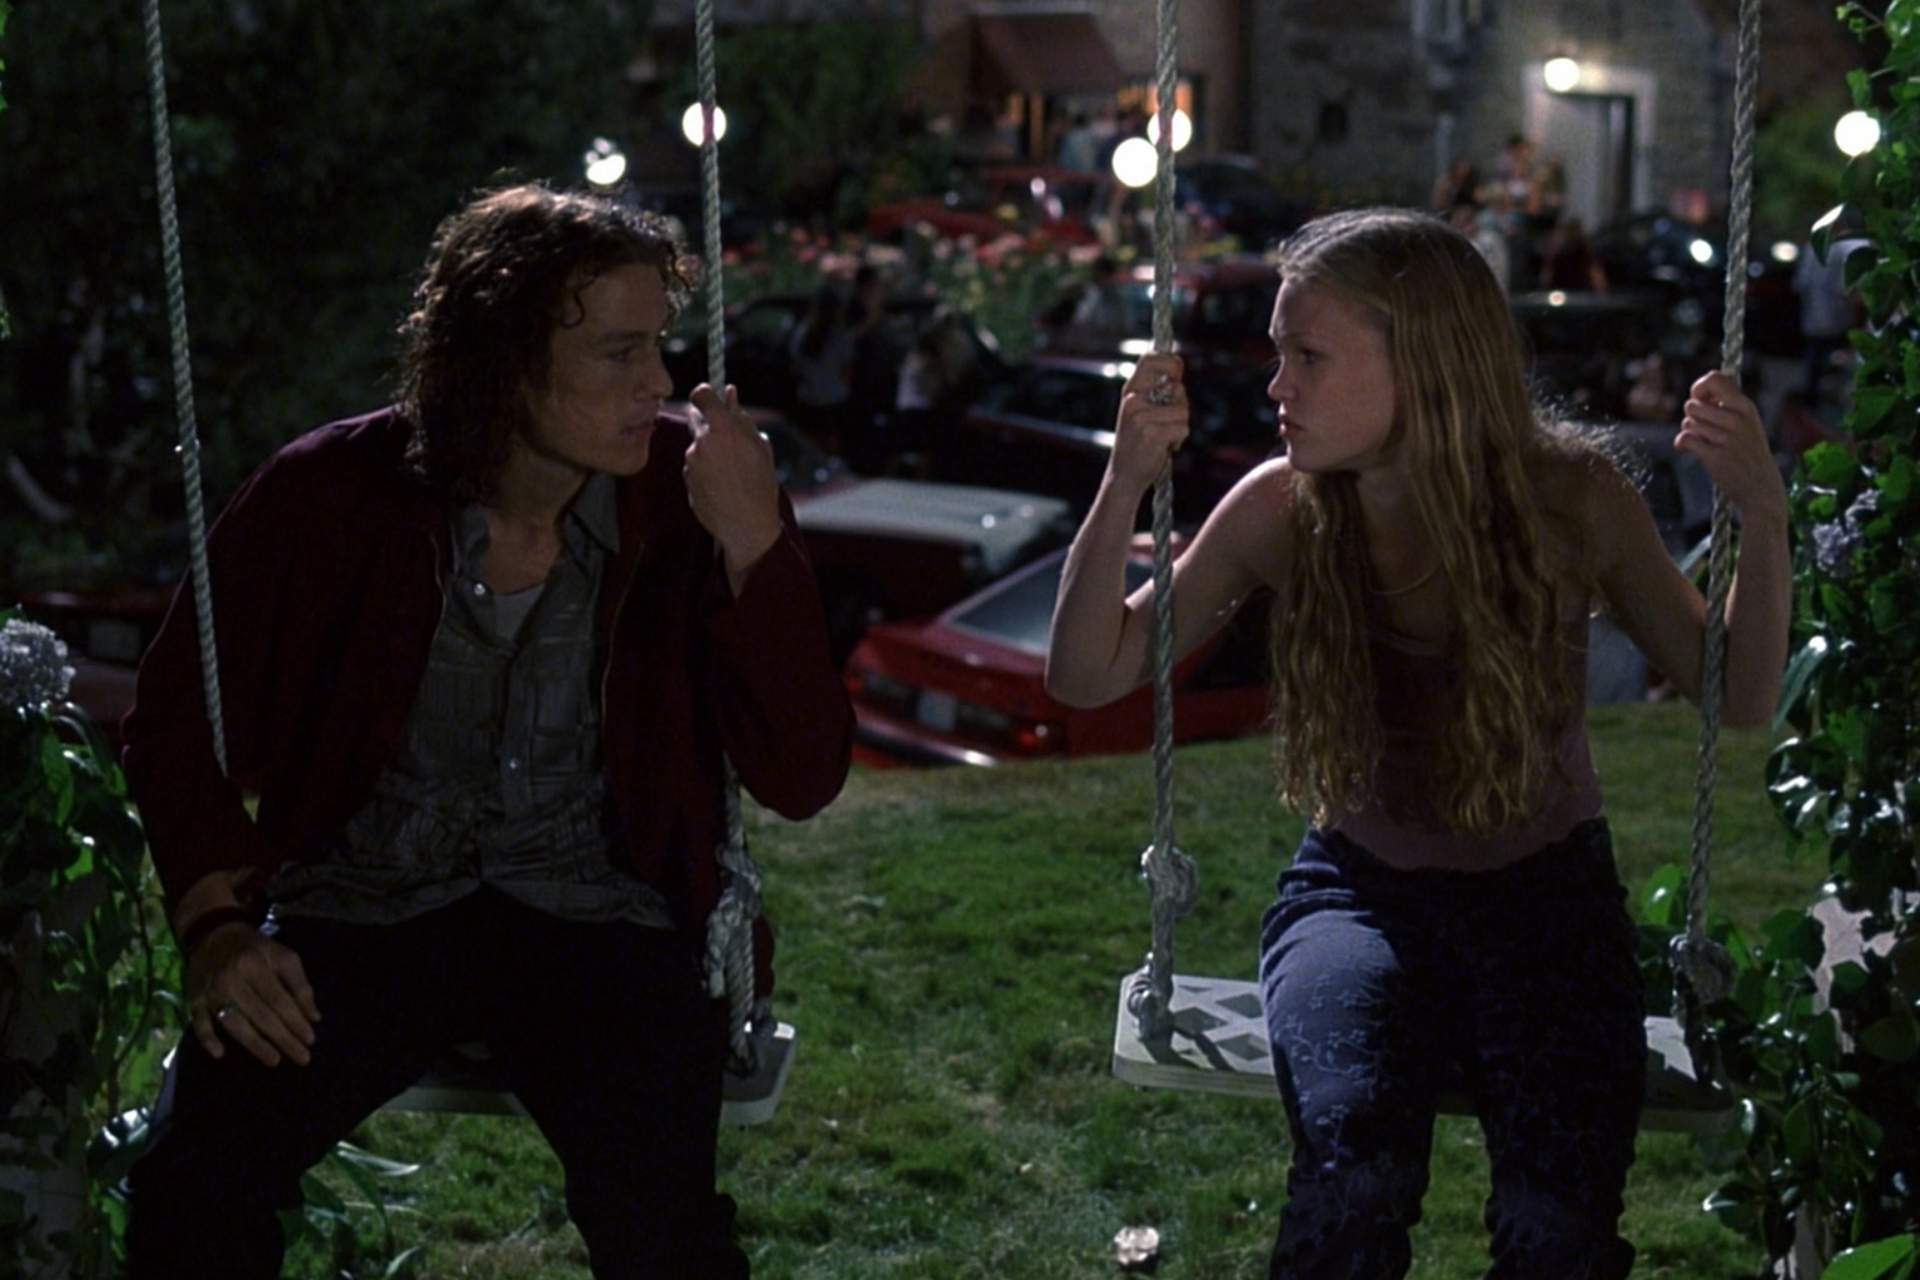 '10 Things I Hate About You' Valentine's Drive-In Screenings